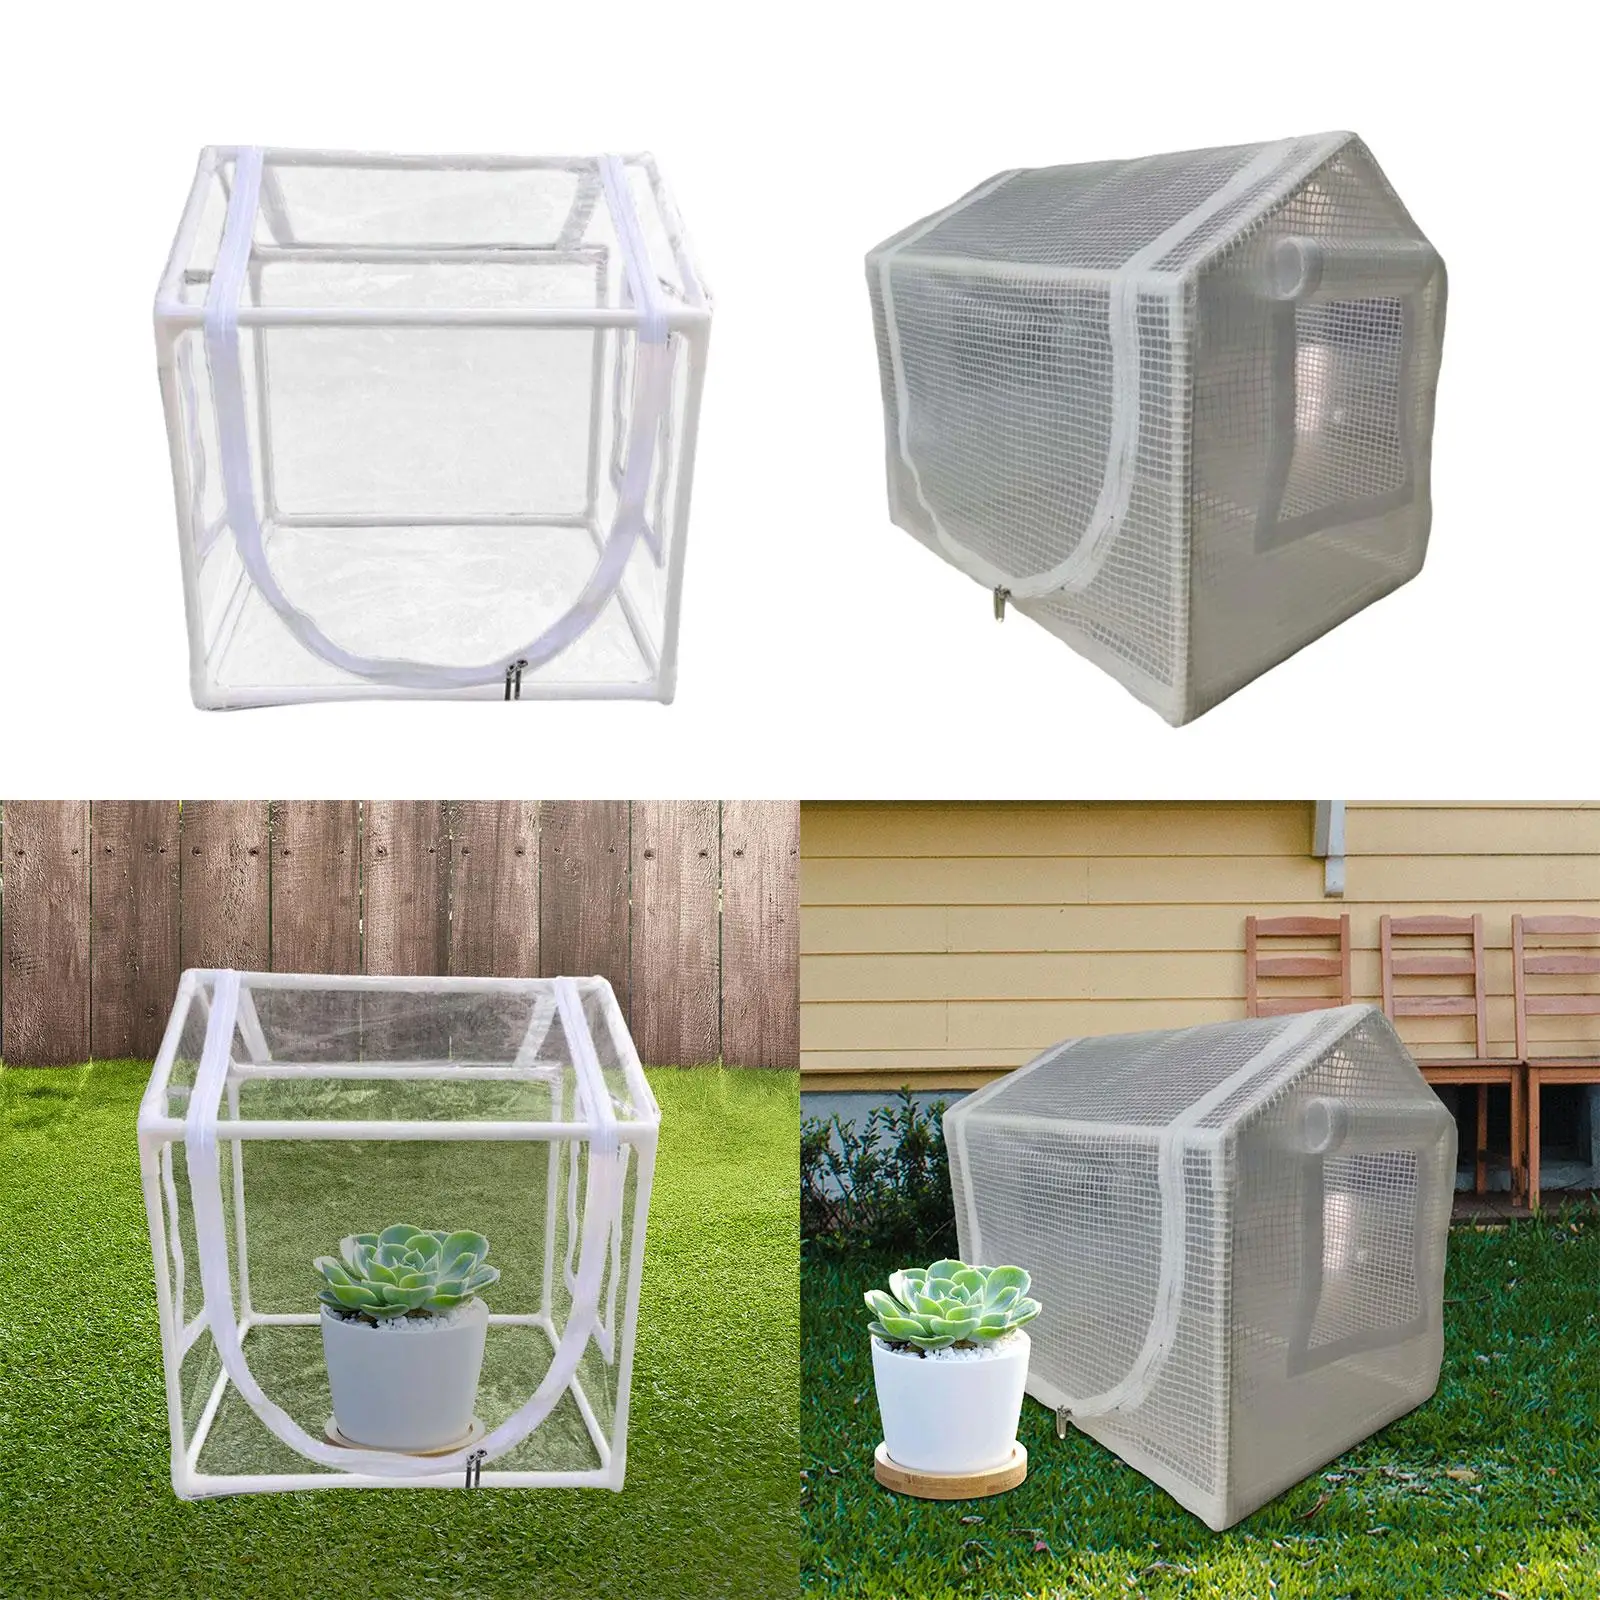 Still Air Box PVC Greenhouse Cover Durable PVC Back Porch Greenhouse Easy to Use Foldable Easy Storage Yard Garden Greenhouse